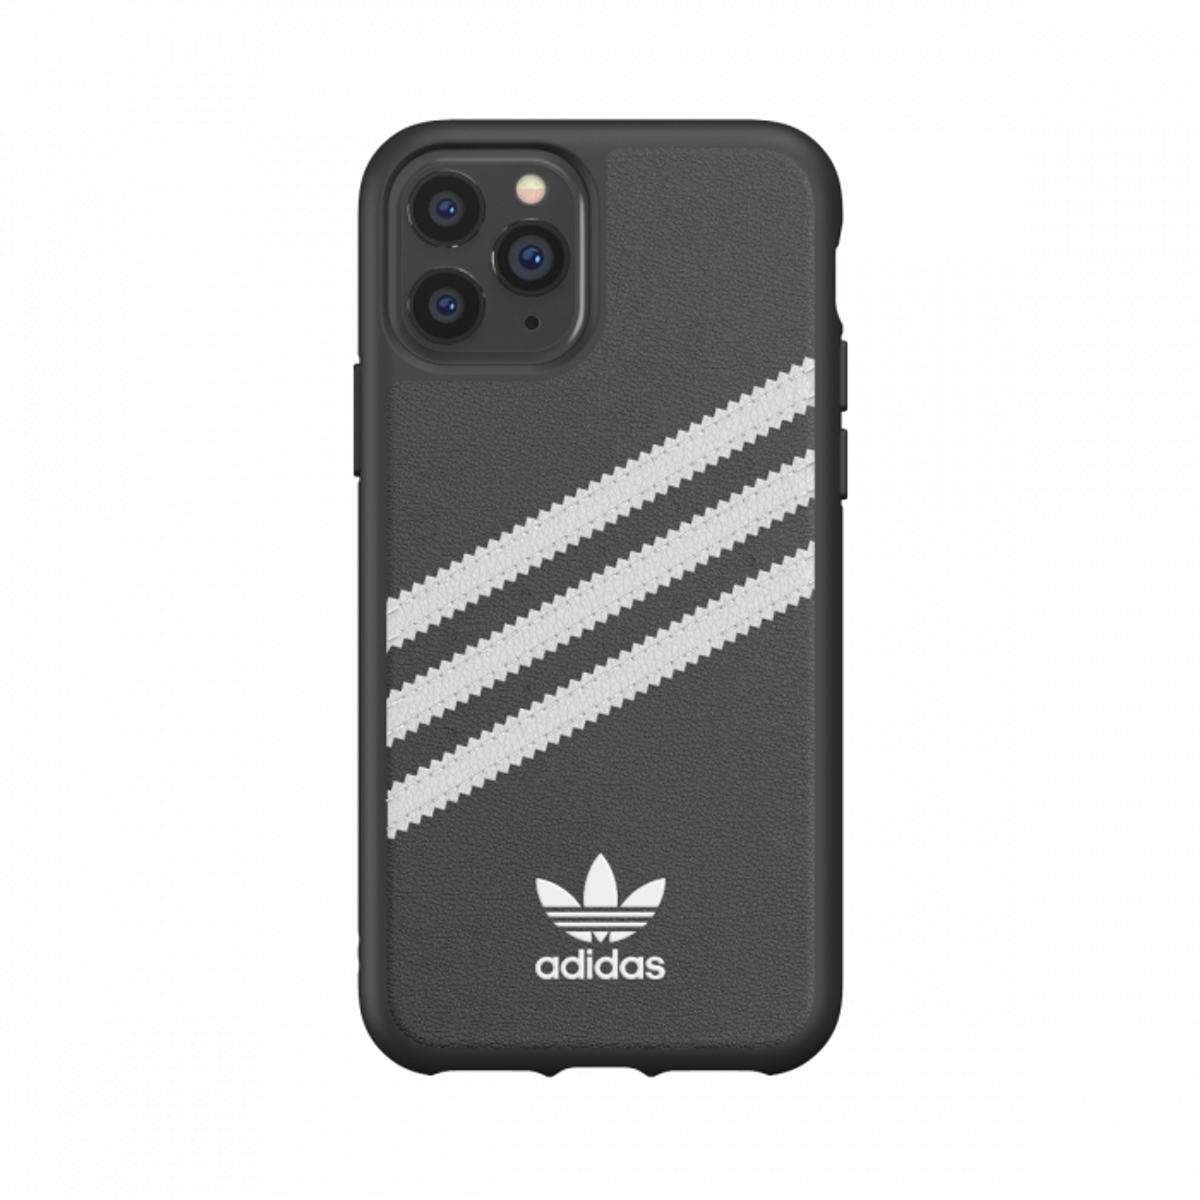 Pro, 11 36279 PRO Schwarz/Weiß OR MOULDED BL/WH, 11 IP iPhone Apple, ADIDAS CASE Bookcover,